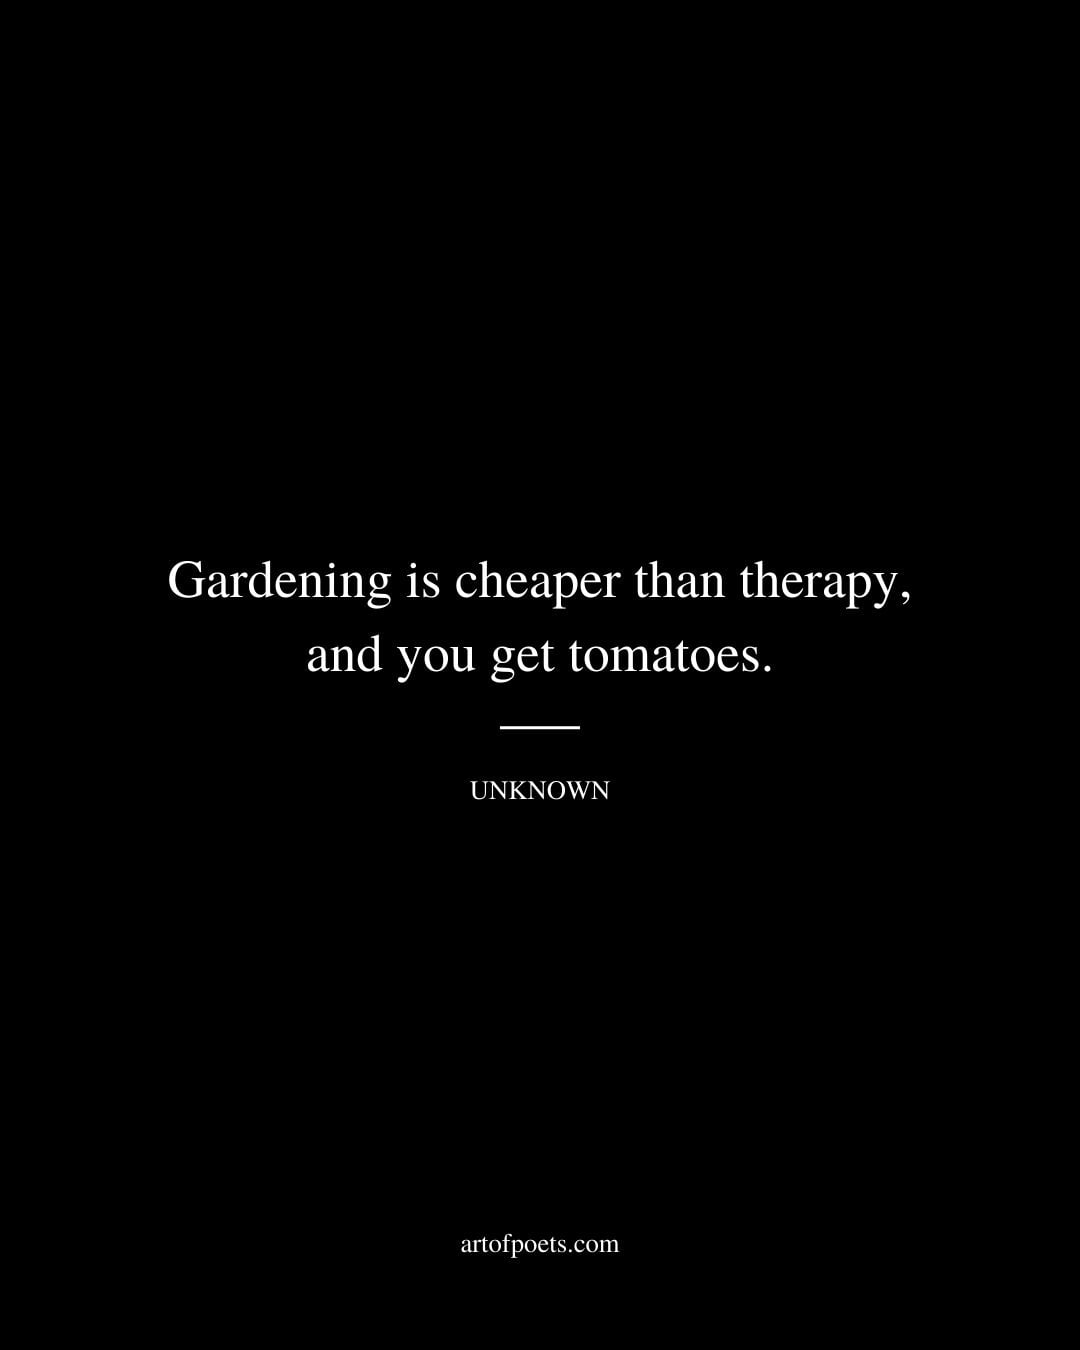 Gardening is cheaper than therapy and you get tomatoes. Unknown